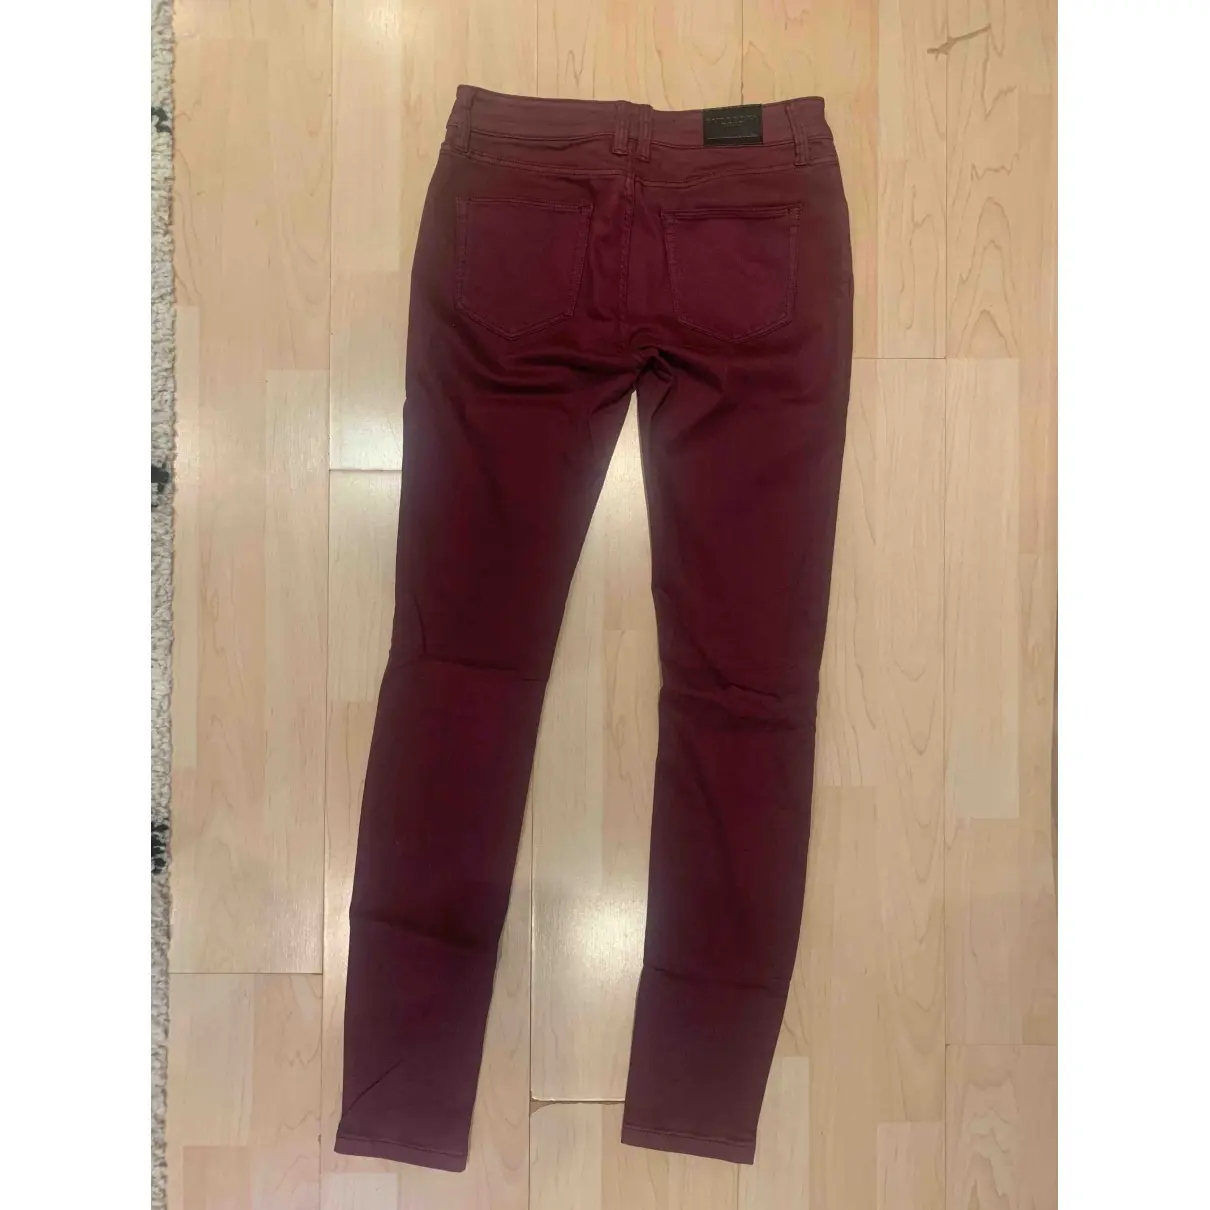 Burberry Slim jeans for sale